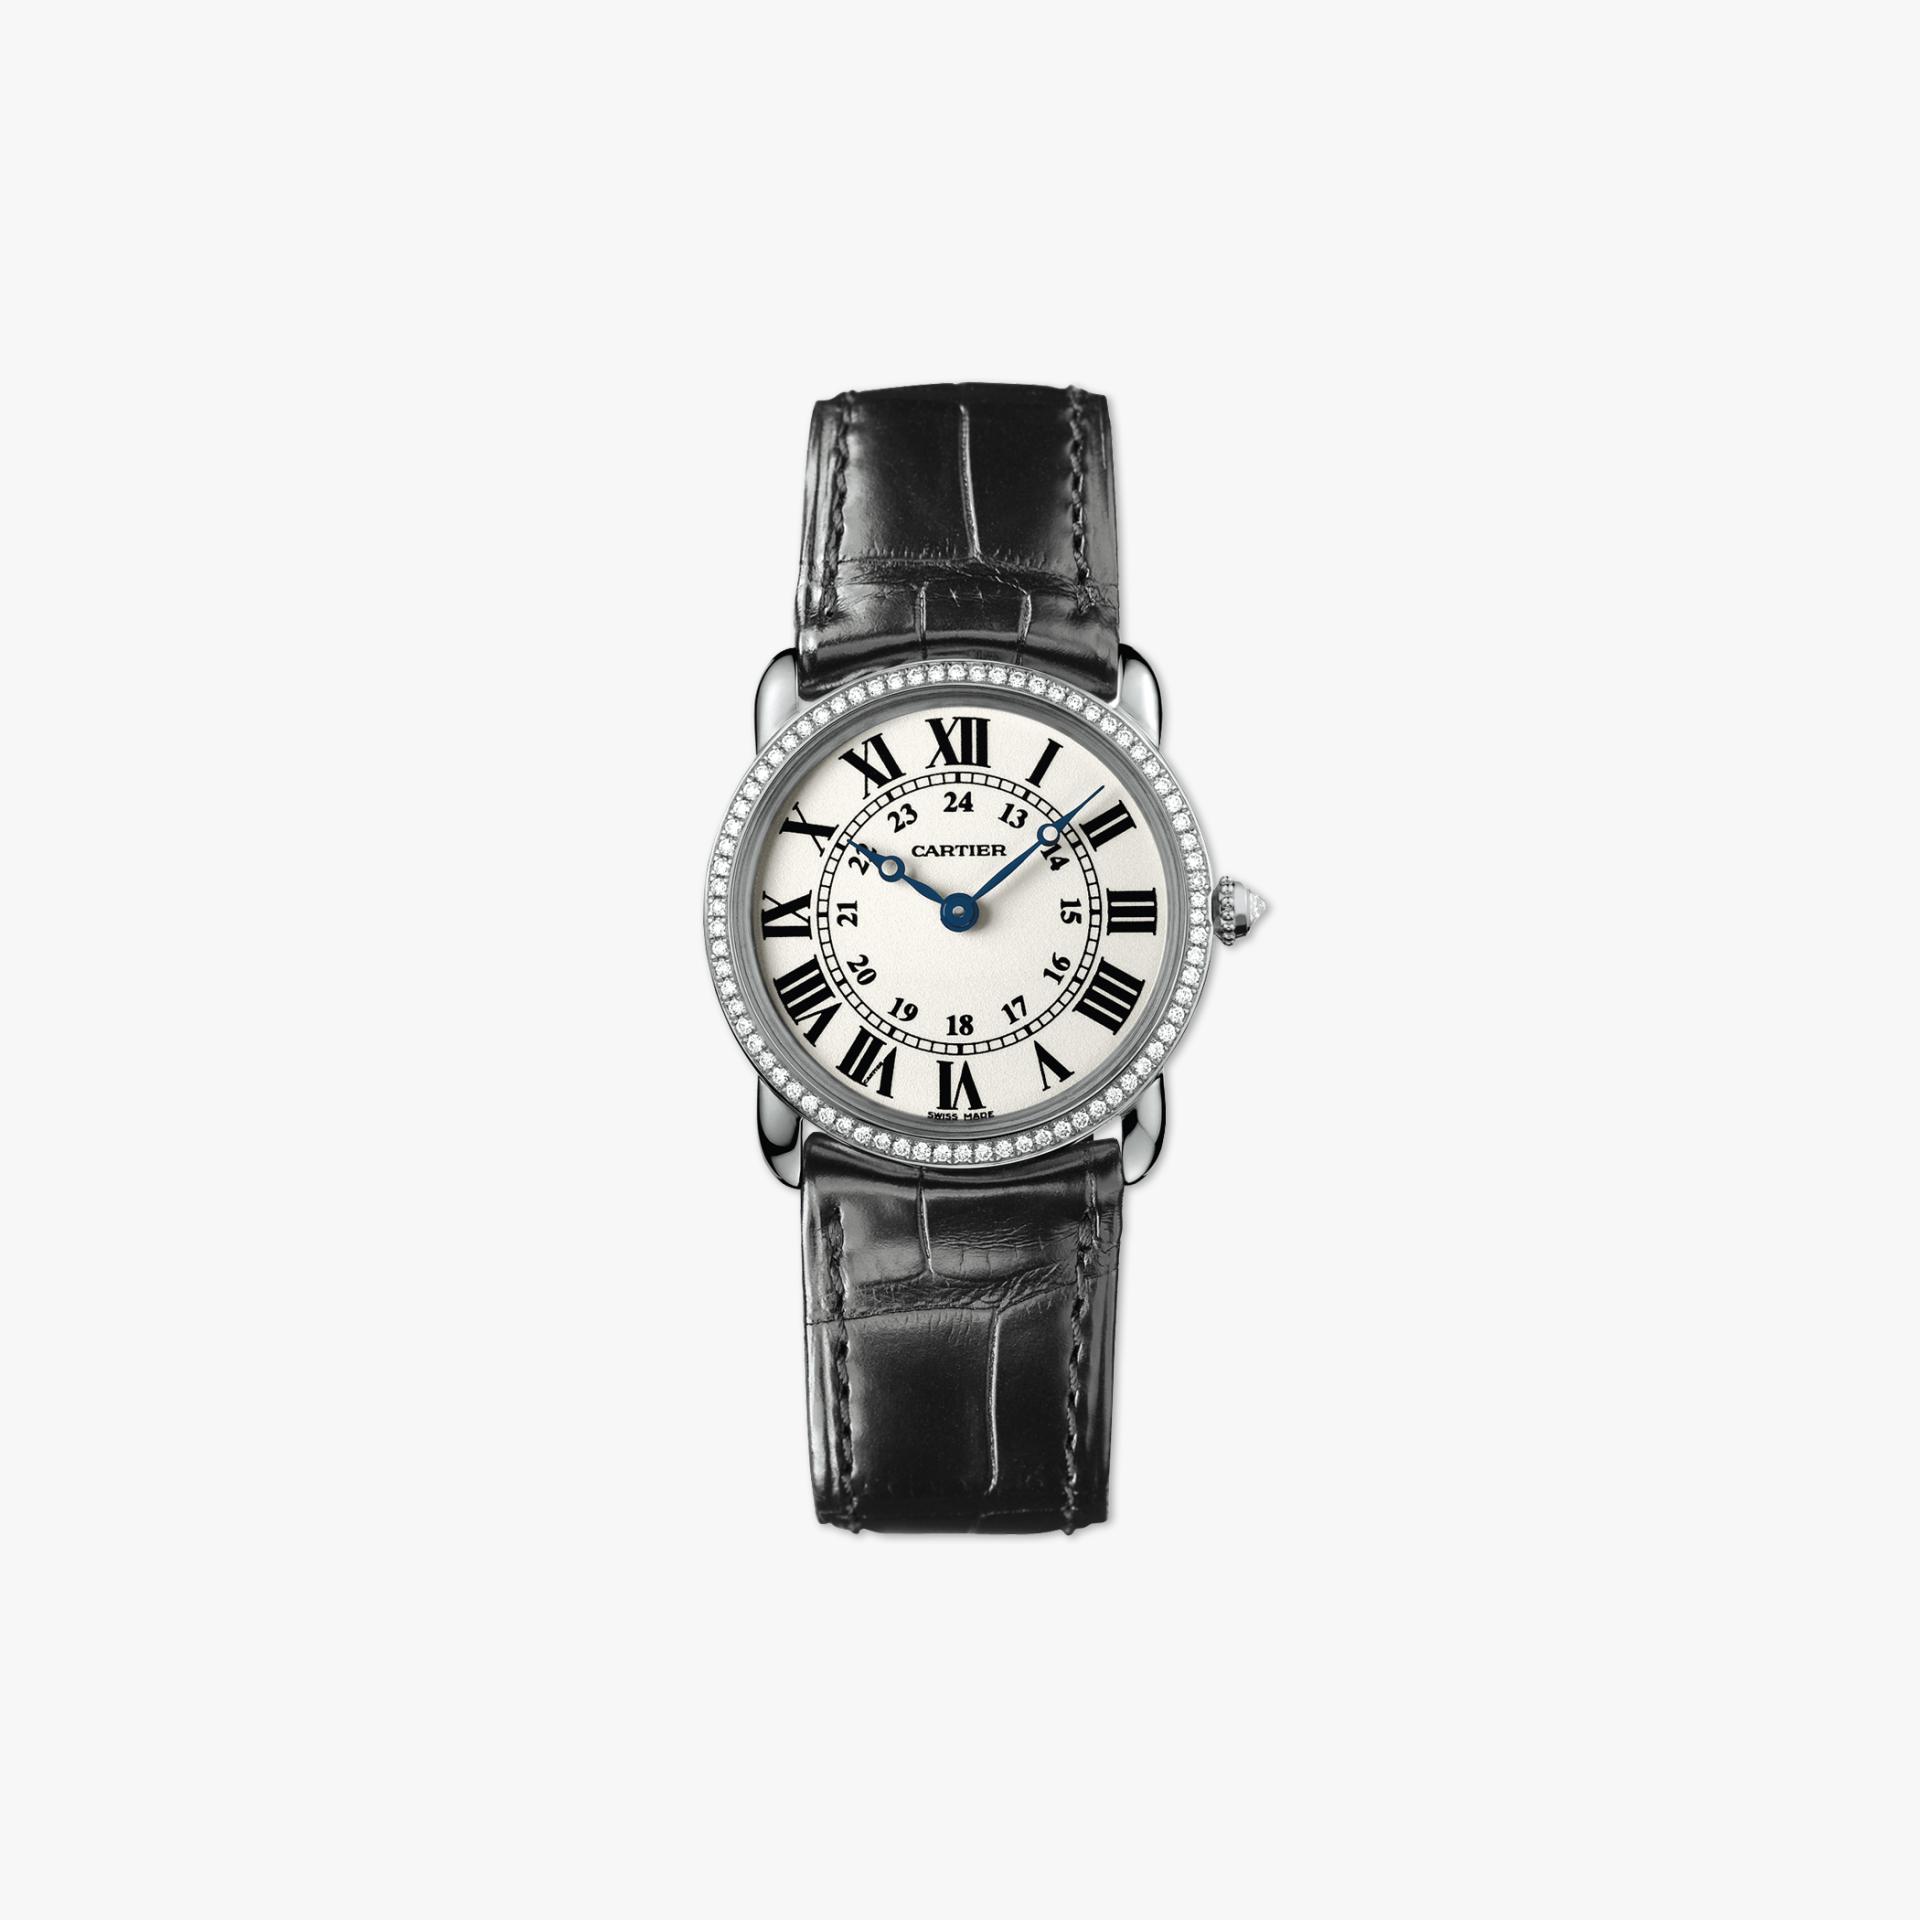 Ronde Louis Cartier made by Cartier